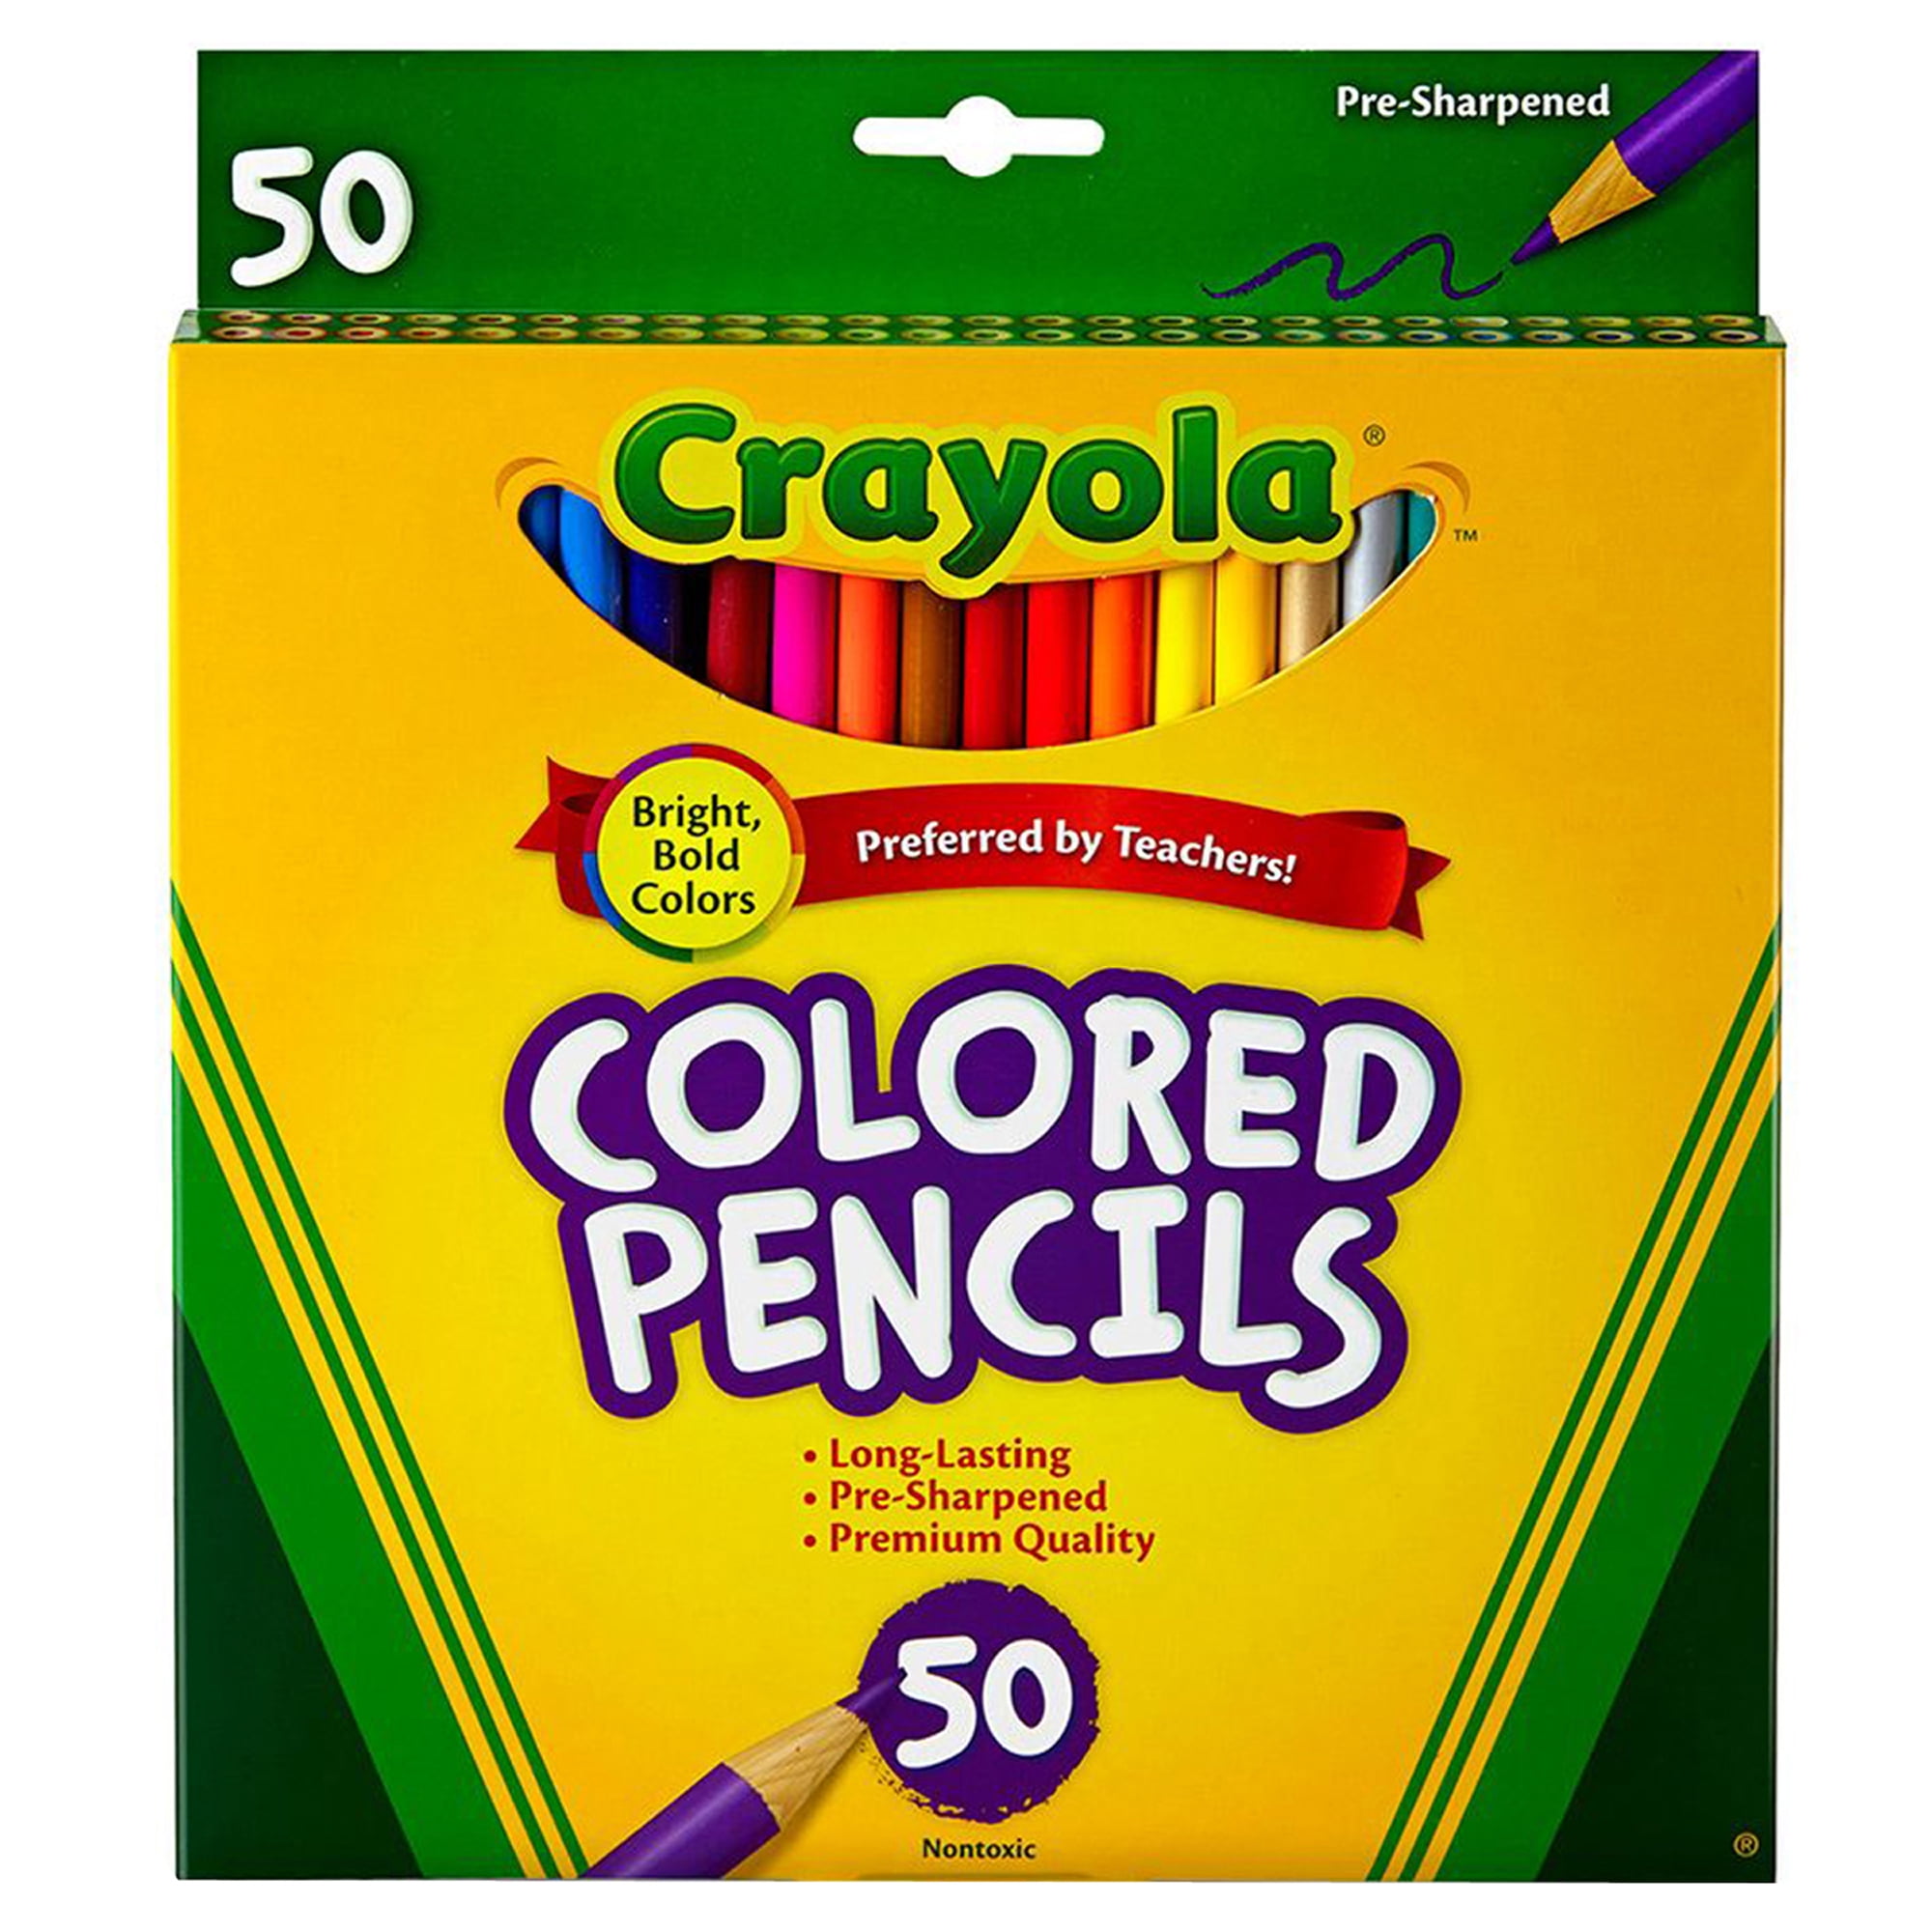 Crayola Colored Pencils For Adults (50 Count), Colored Pencil Set For Adult  Coloring, Back To School Supplies For High School [ Exclusive] -  Imported Products from USA - iBhejo